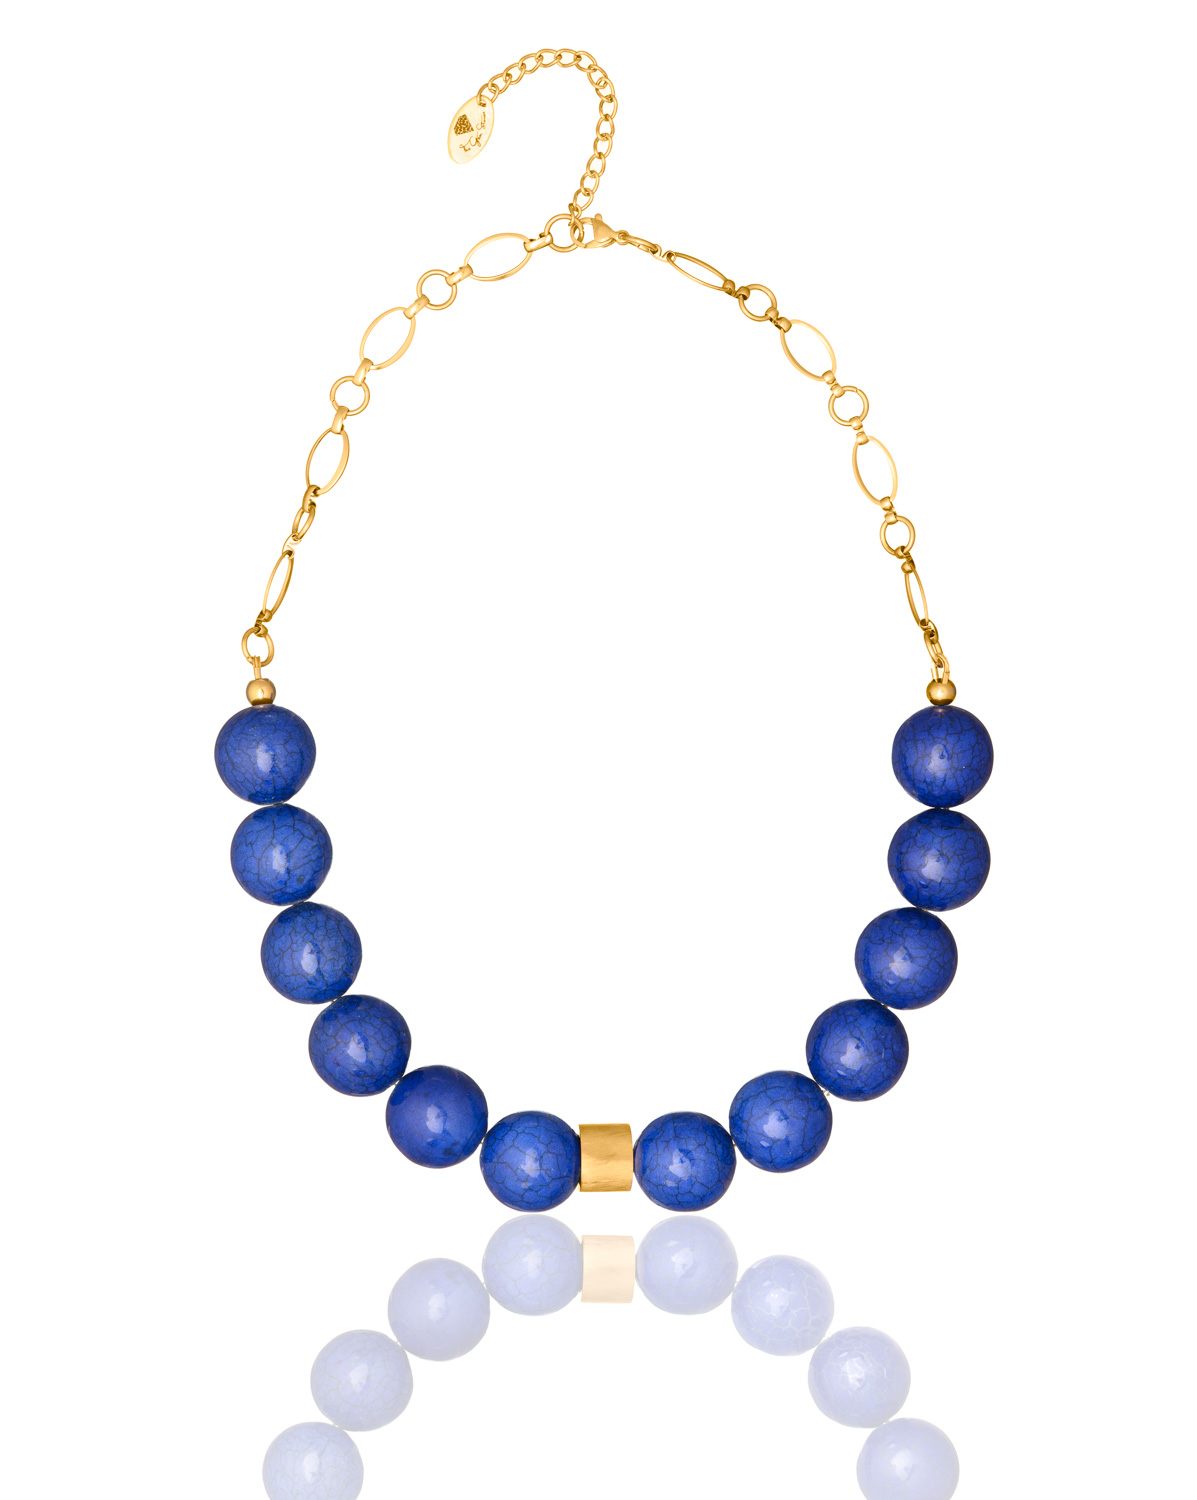 Dynamic Agate Necklace - Blue